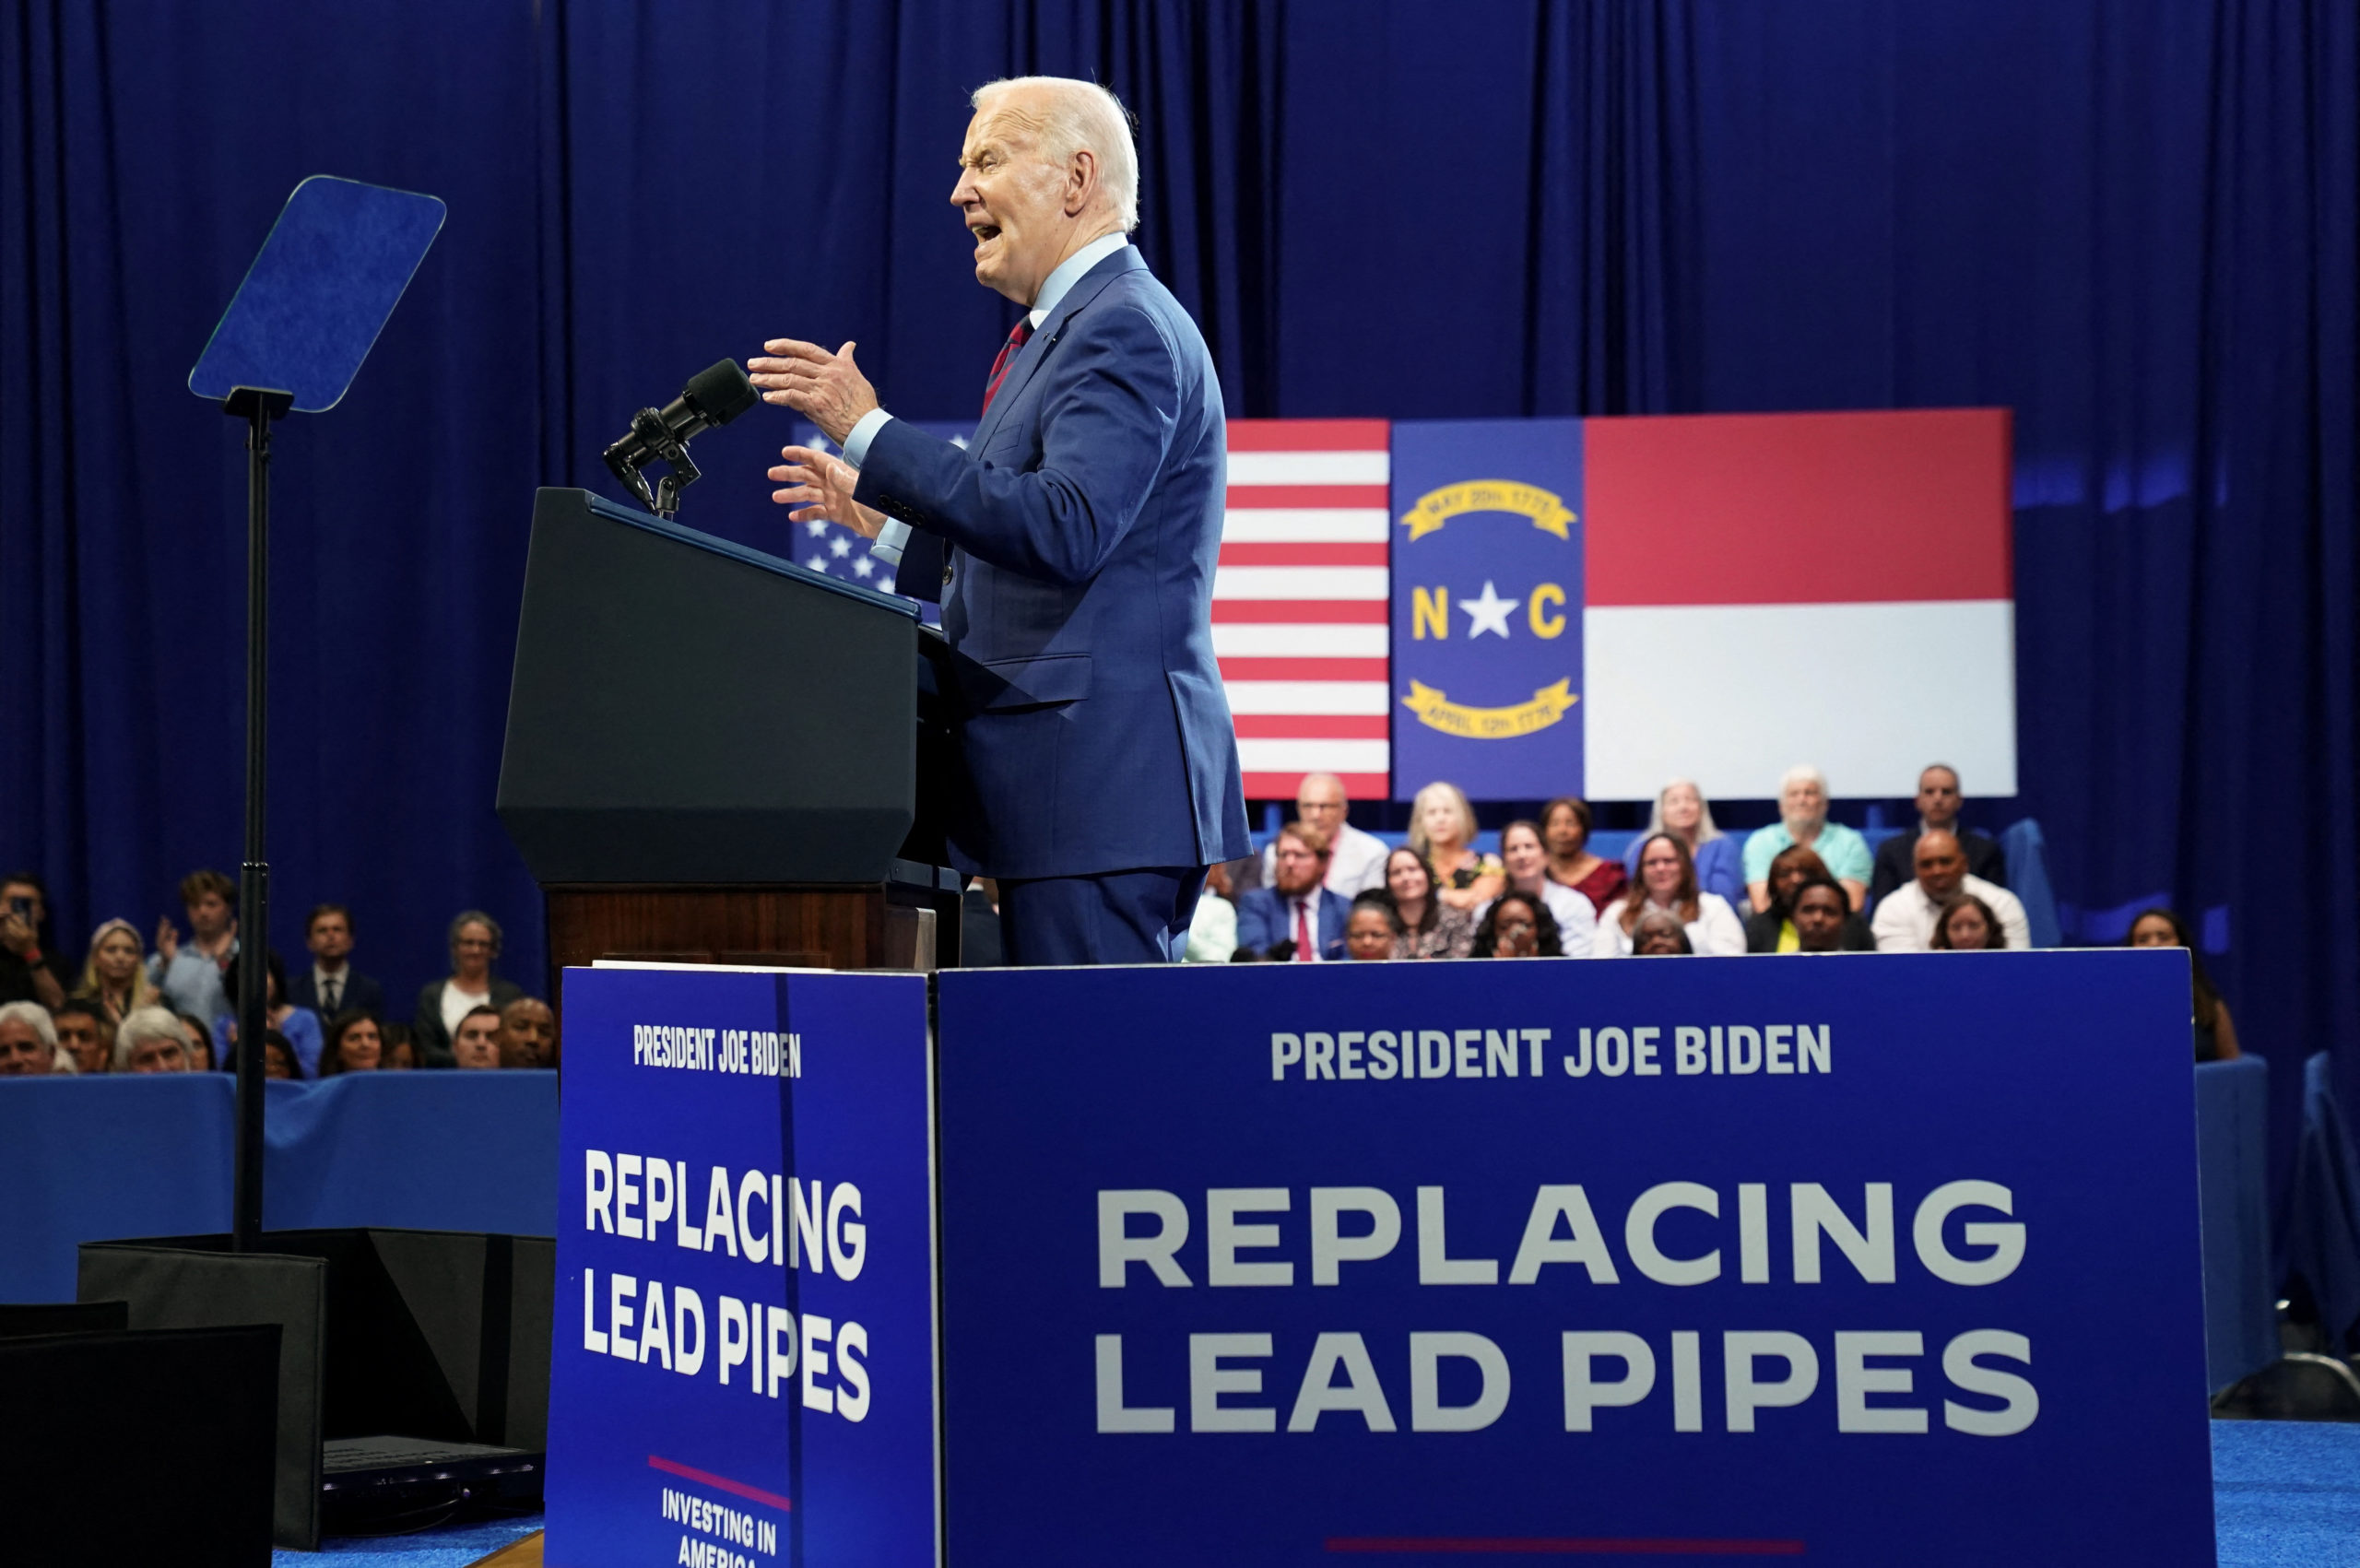 U.S. President Joe Biden delivers remarks on environmental health and infrastructure funding for replacing lead pipes, as part of his Investing In America agenda, during a campaign event in Wilmington, North Carolina, U.S., May 2, 2024. REUTERS/Kevin Lamarque